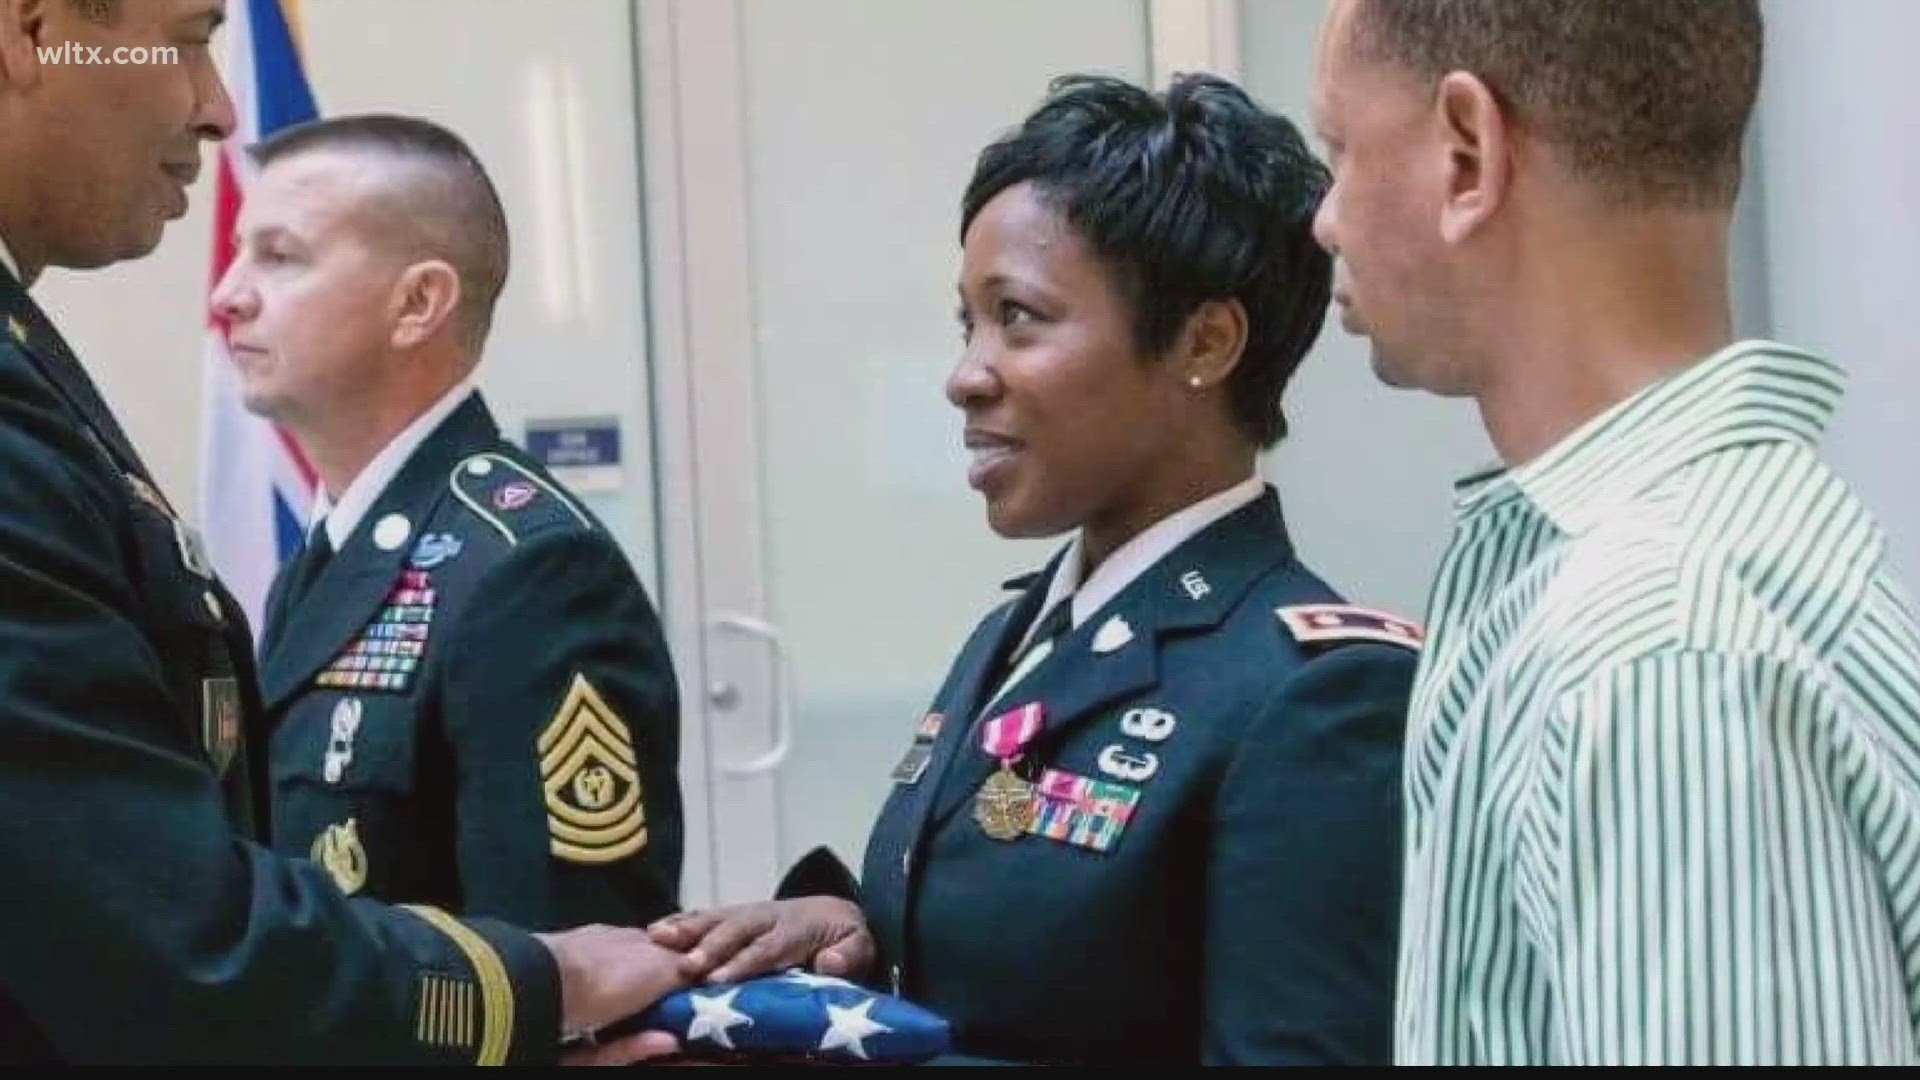 After more than two decades in the Army, Major Luella Wallace knows a lot about winning on the battlefield. Now, she's been promoted to breast cancer survivor.